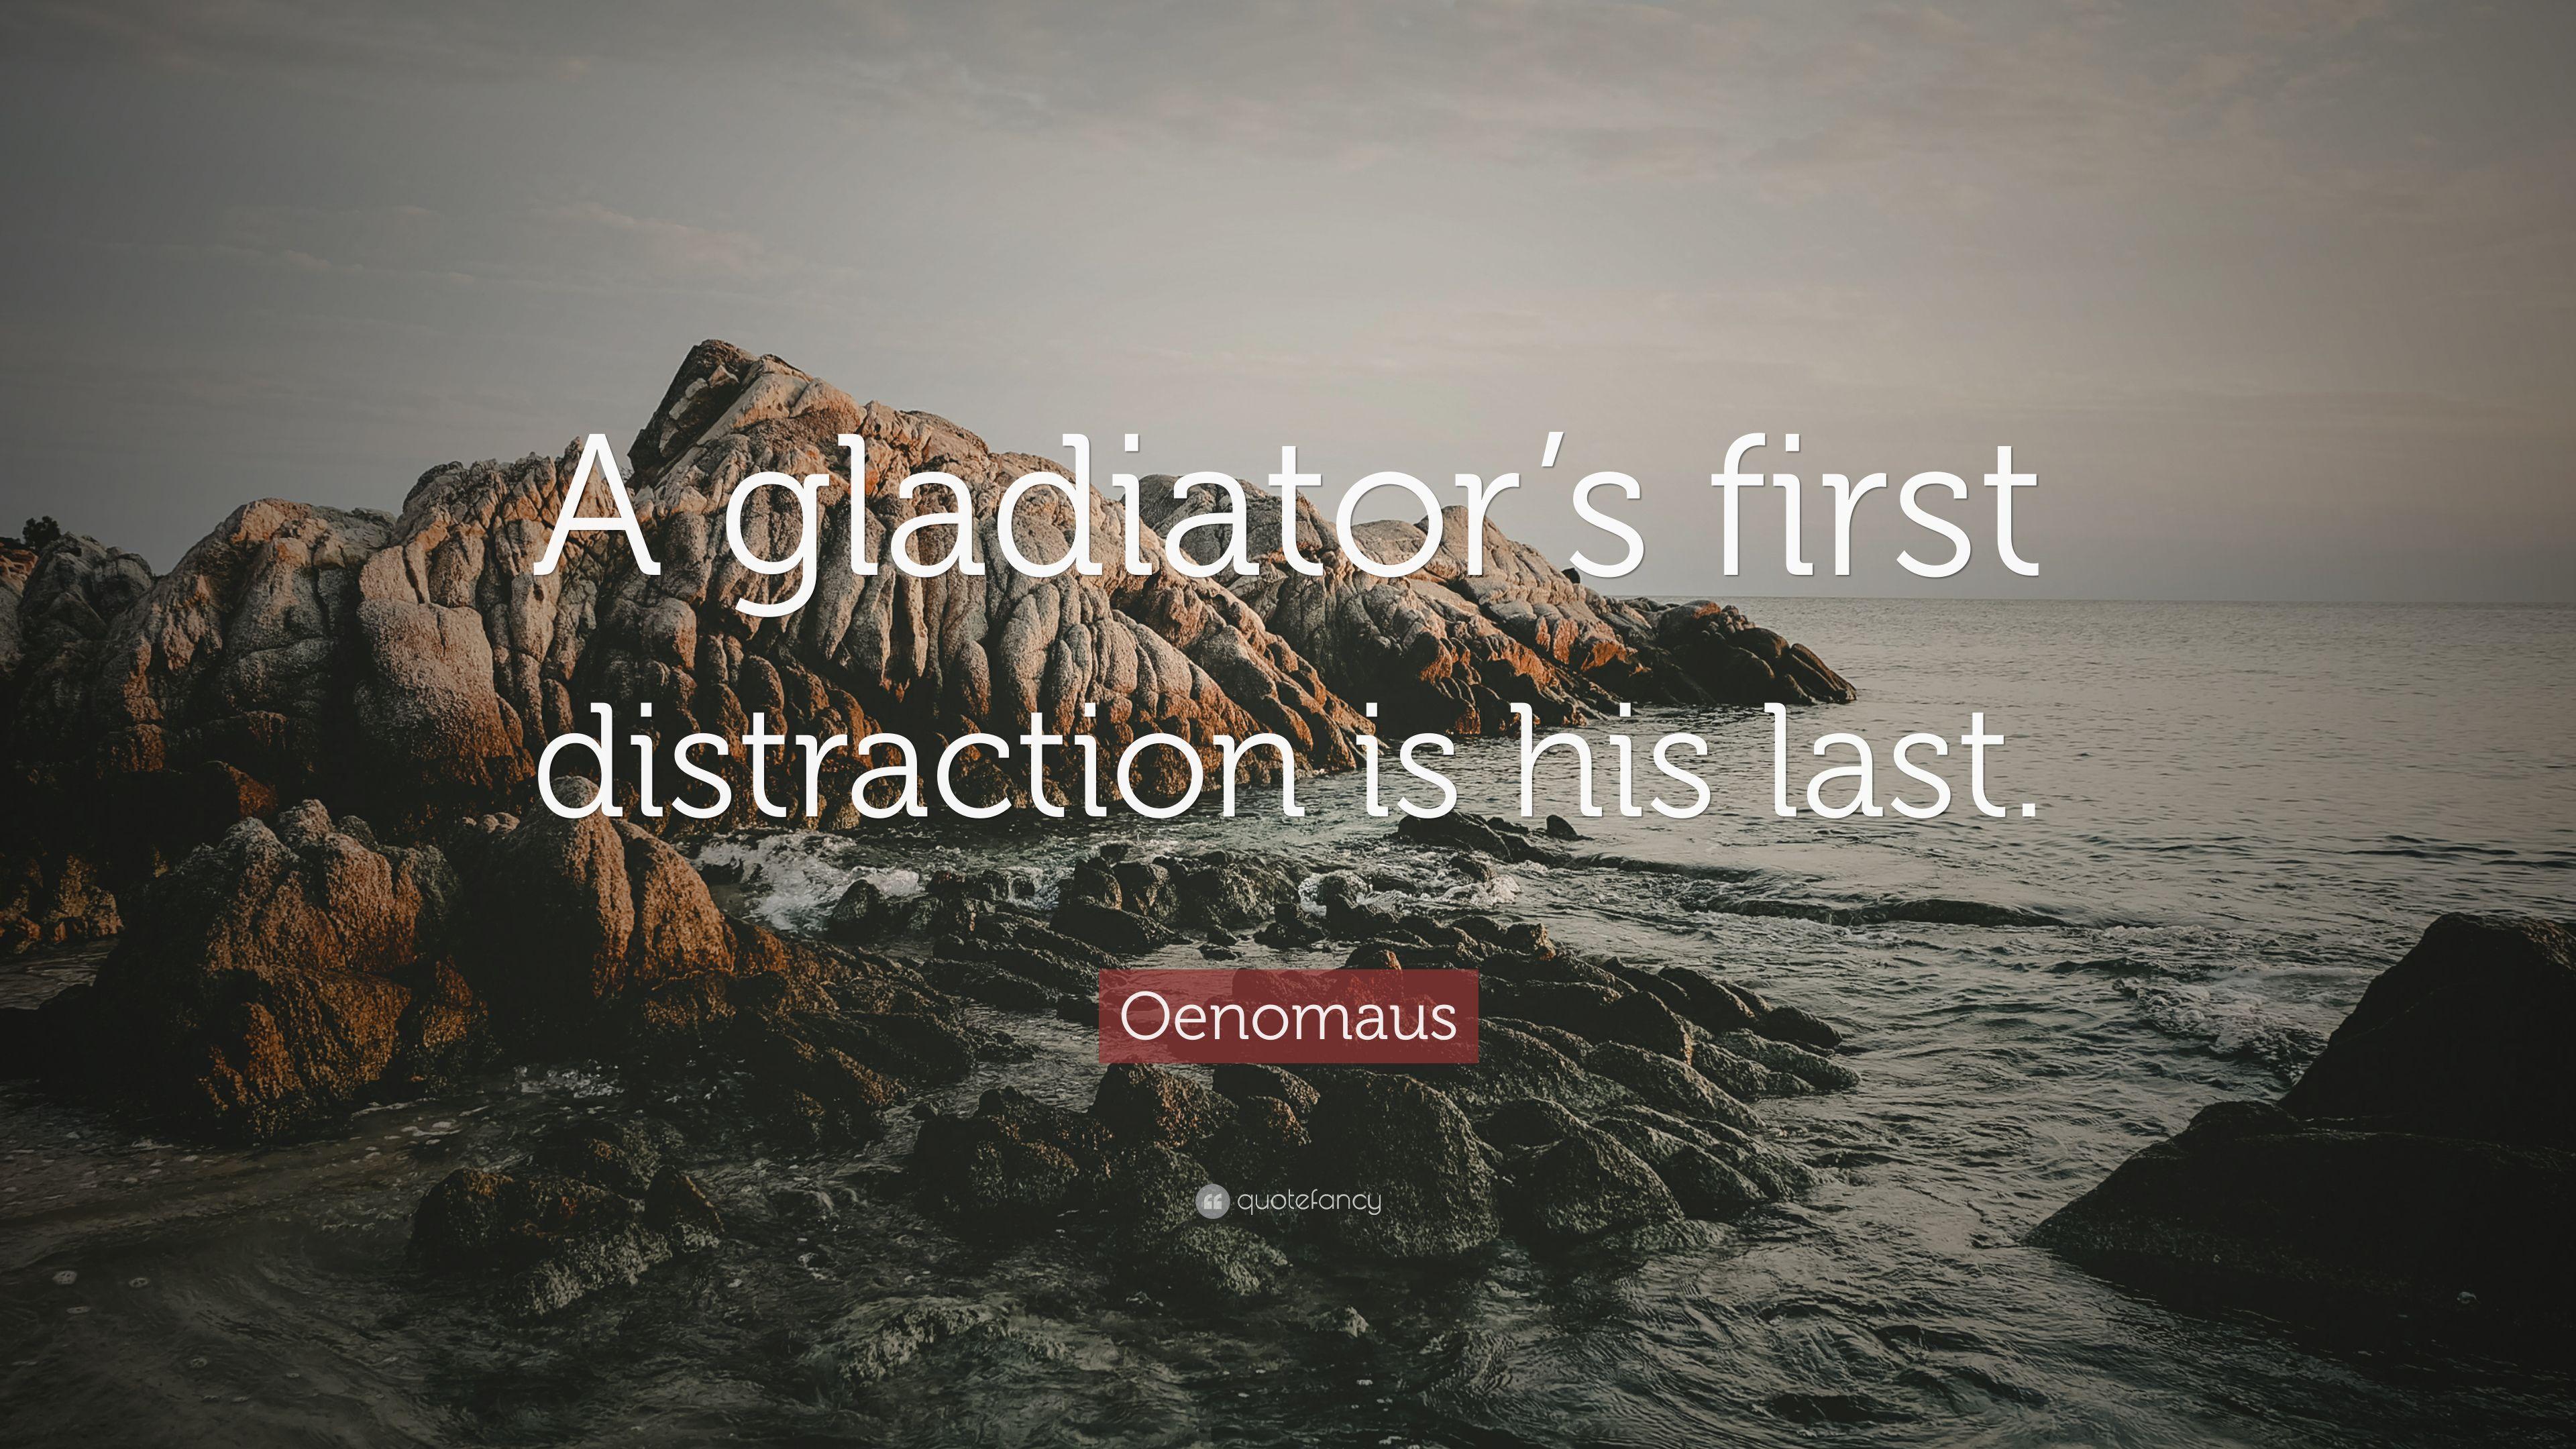 Oenomaus Quote: “A gladiator's first distraction is his last.” 9